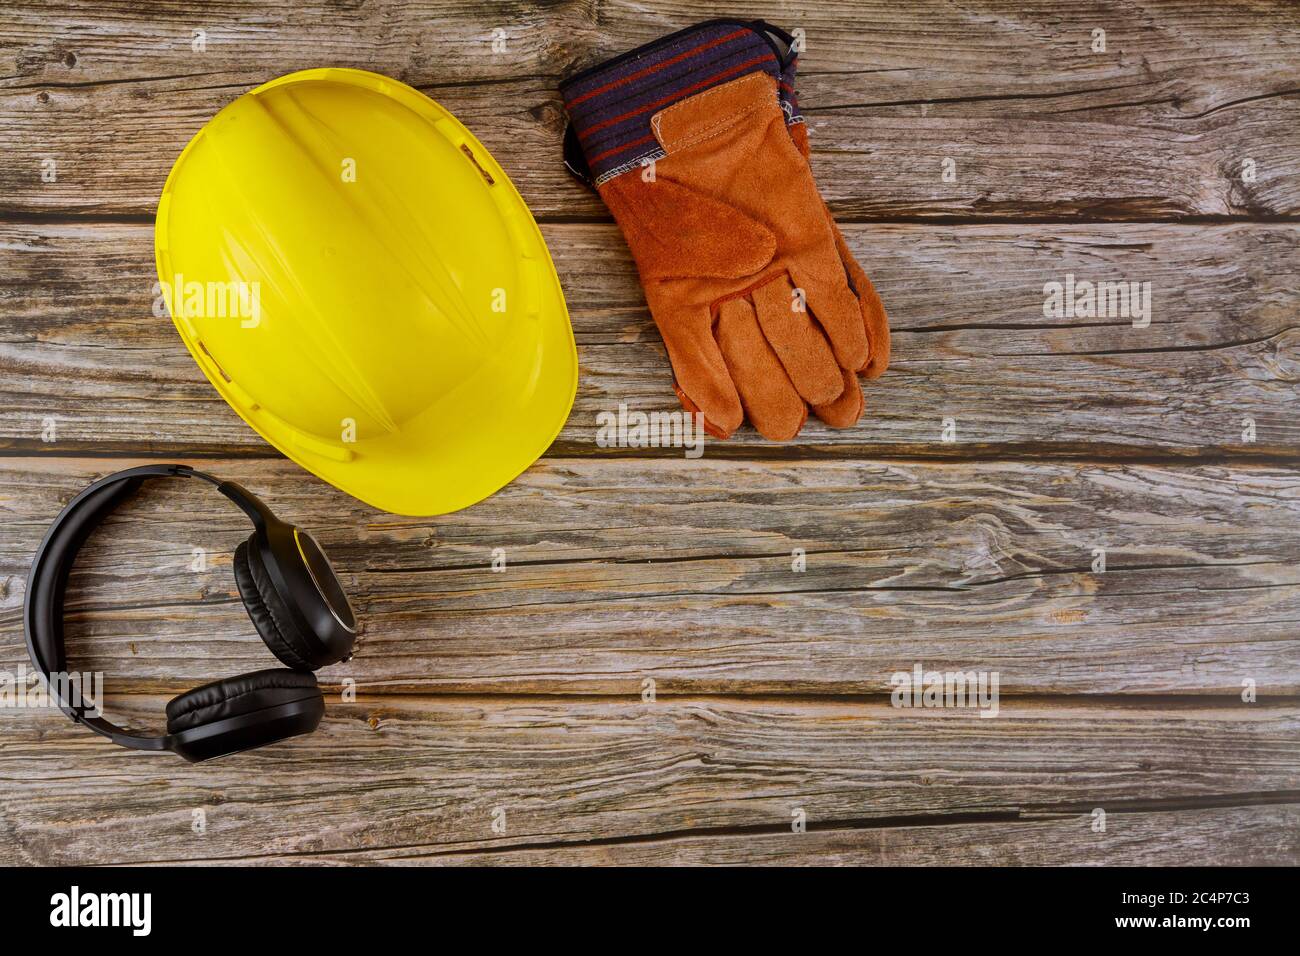 Equipment safety standard construction safety earmuffs leather safety helmet protective gloves on wooden table top view Stock Photo